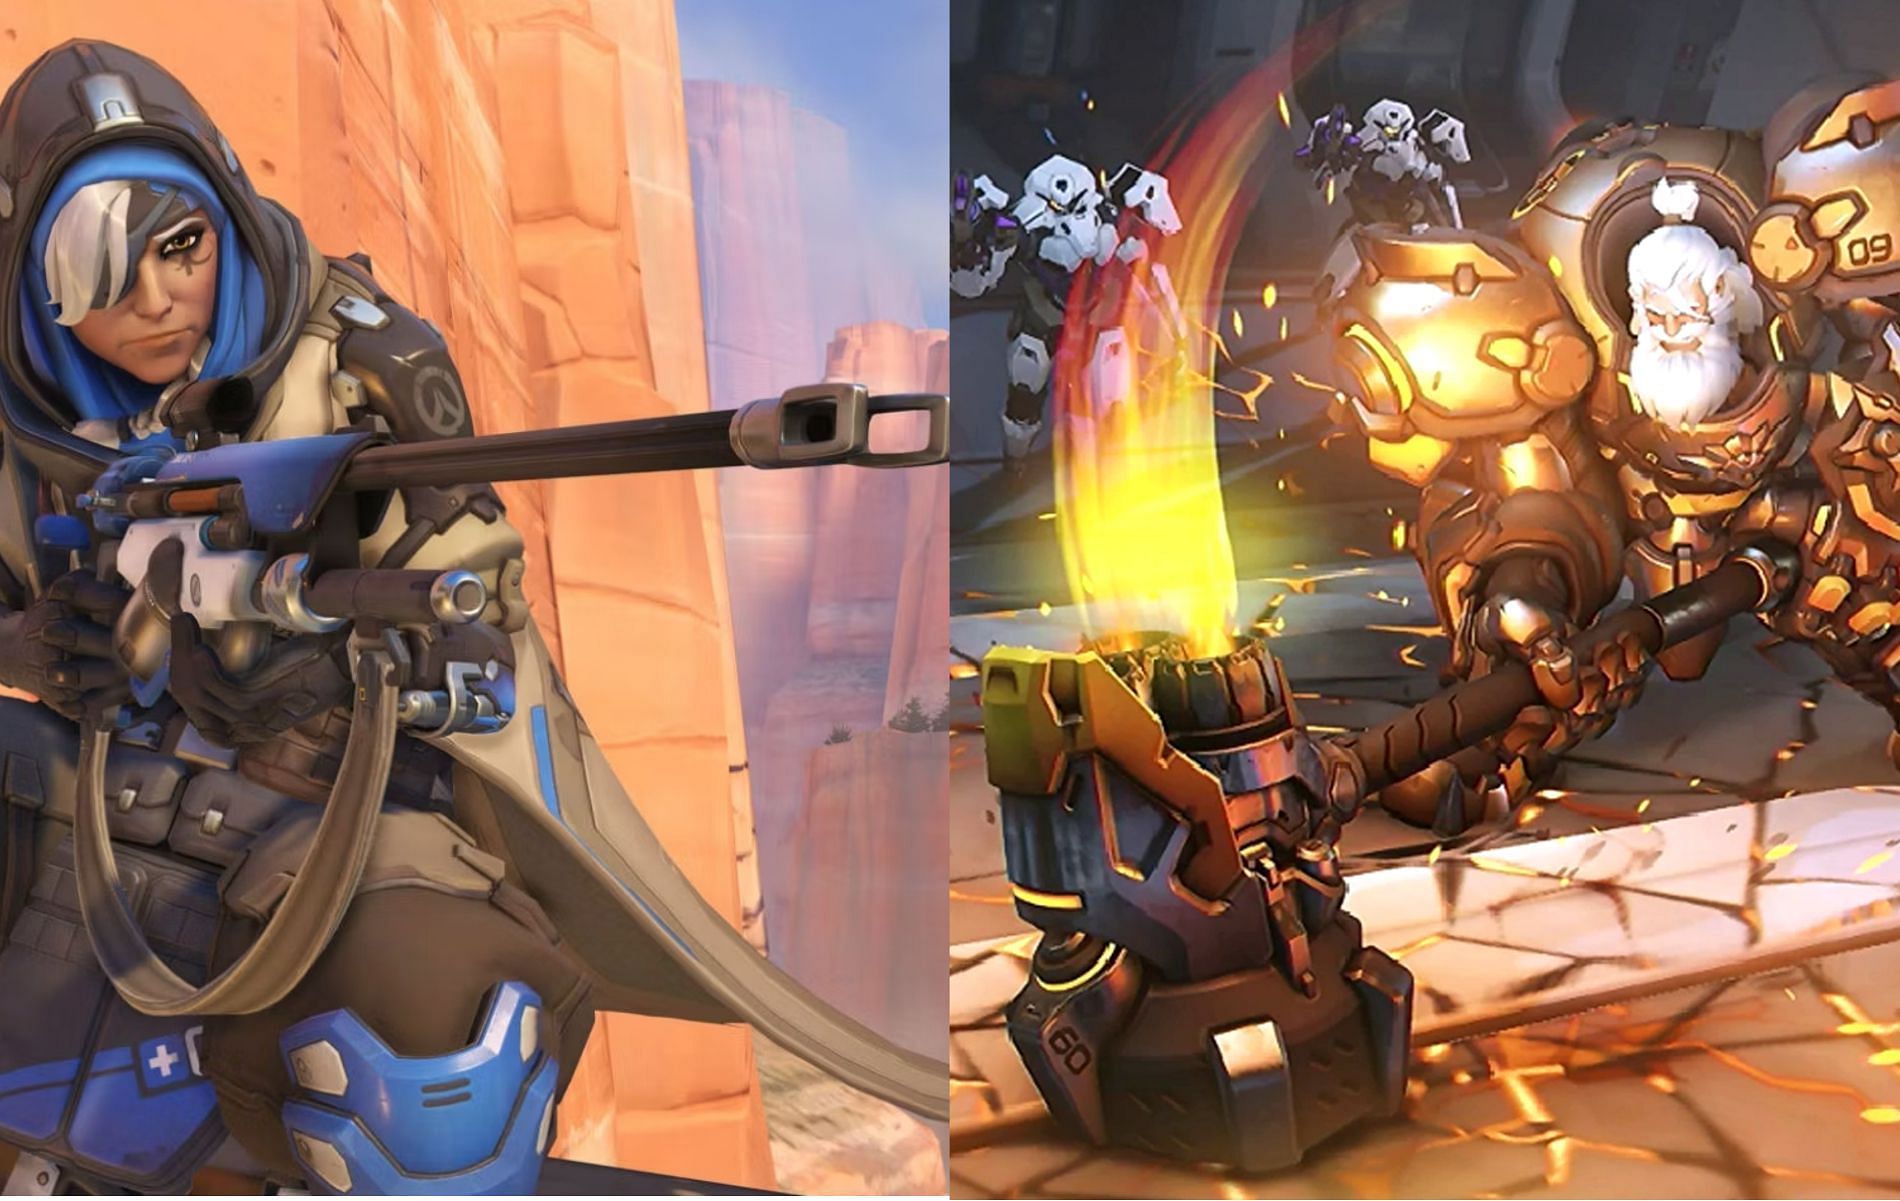 Ana (left) and Reinhardt (right) are a solid Tank and Support duo to rely upon (Images via Blizzard Entertainment)